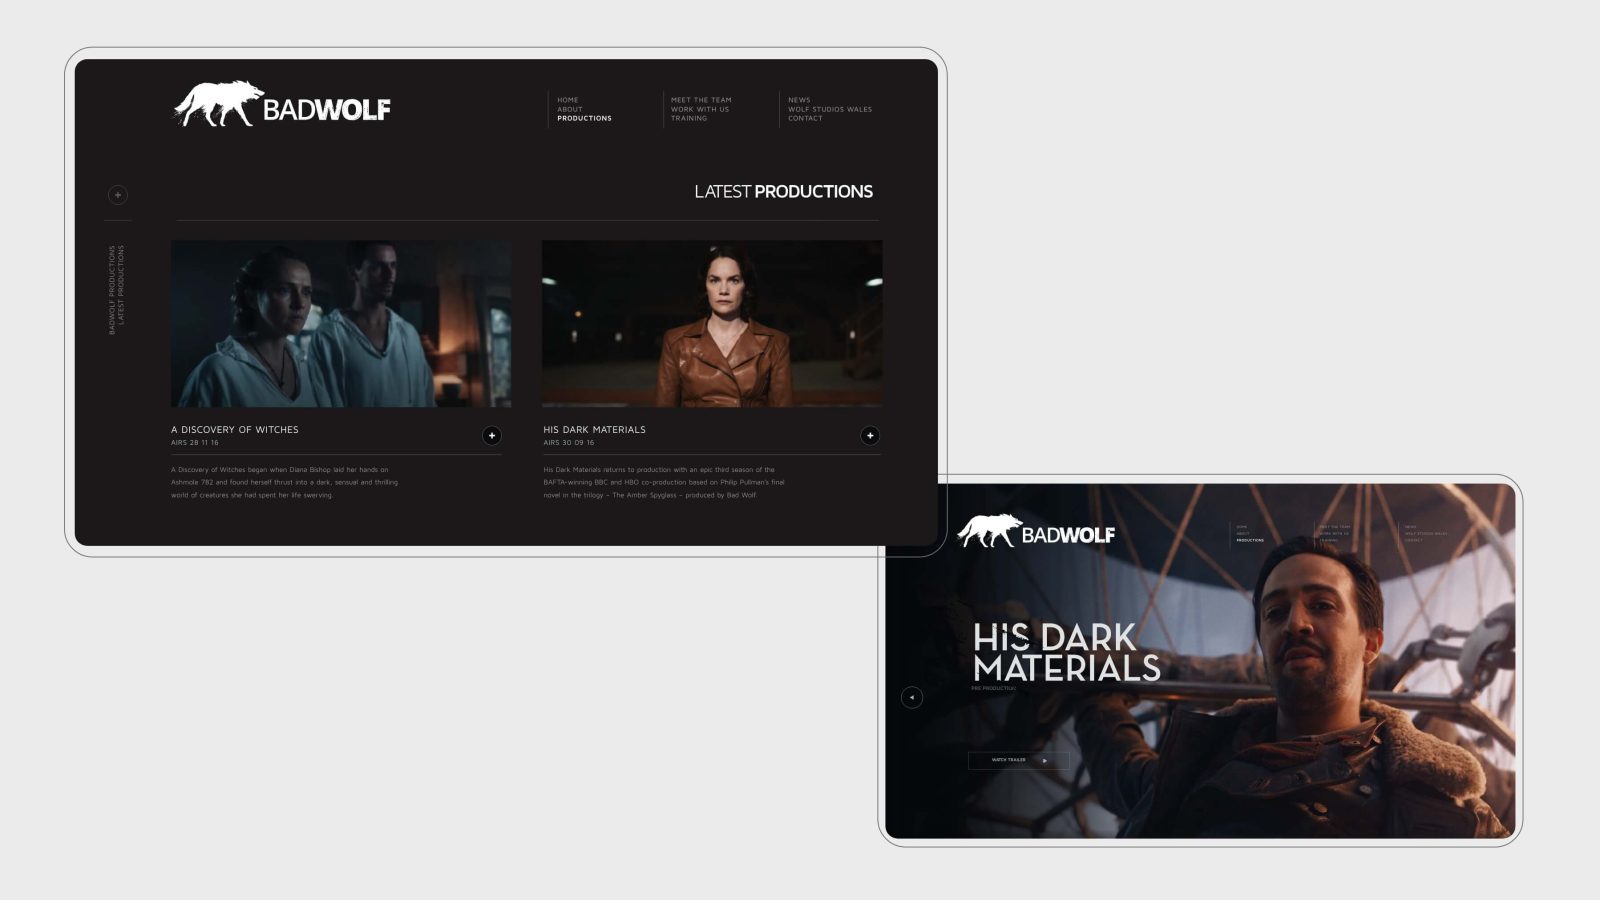 Screenshots of the bad wolf web design agency featuring its latest productions, with main images from 